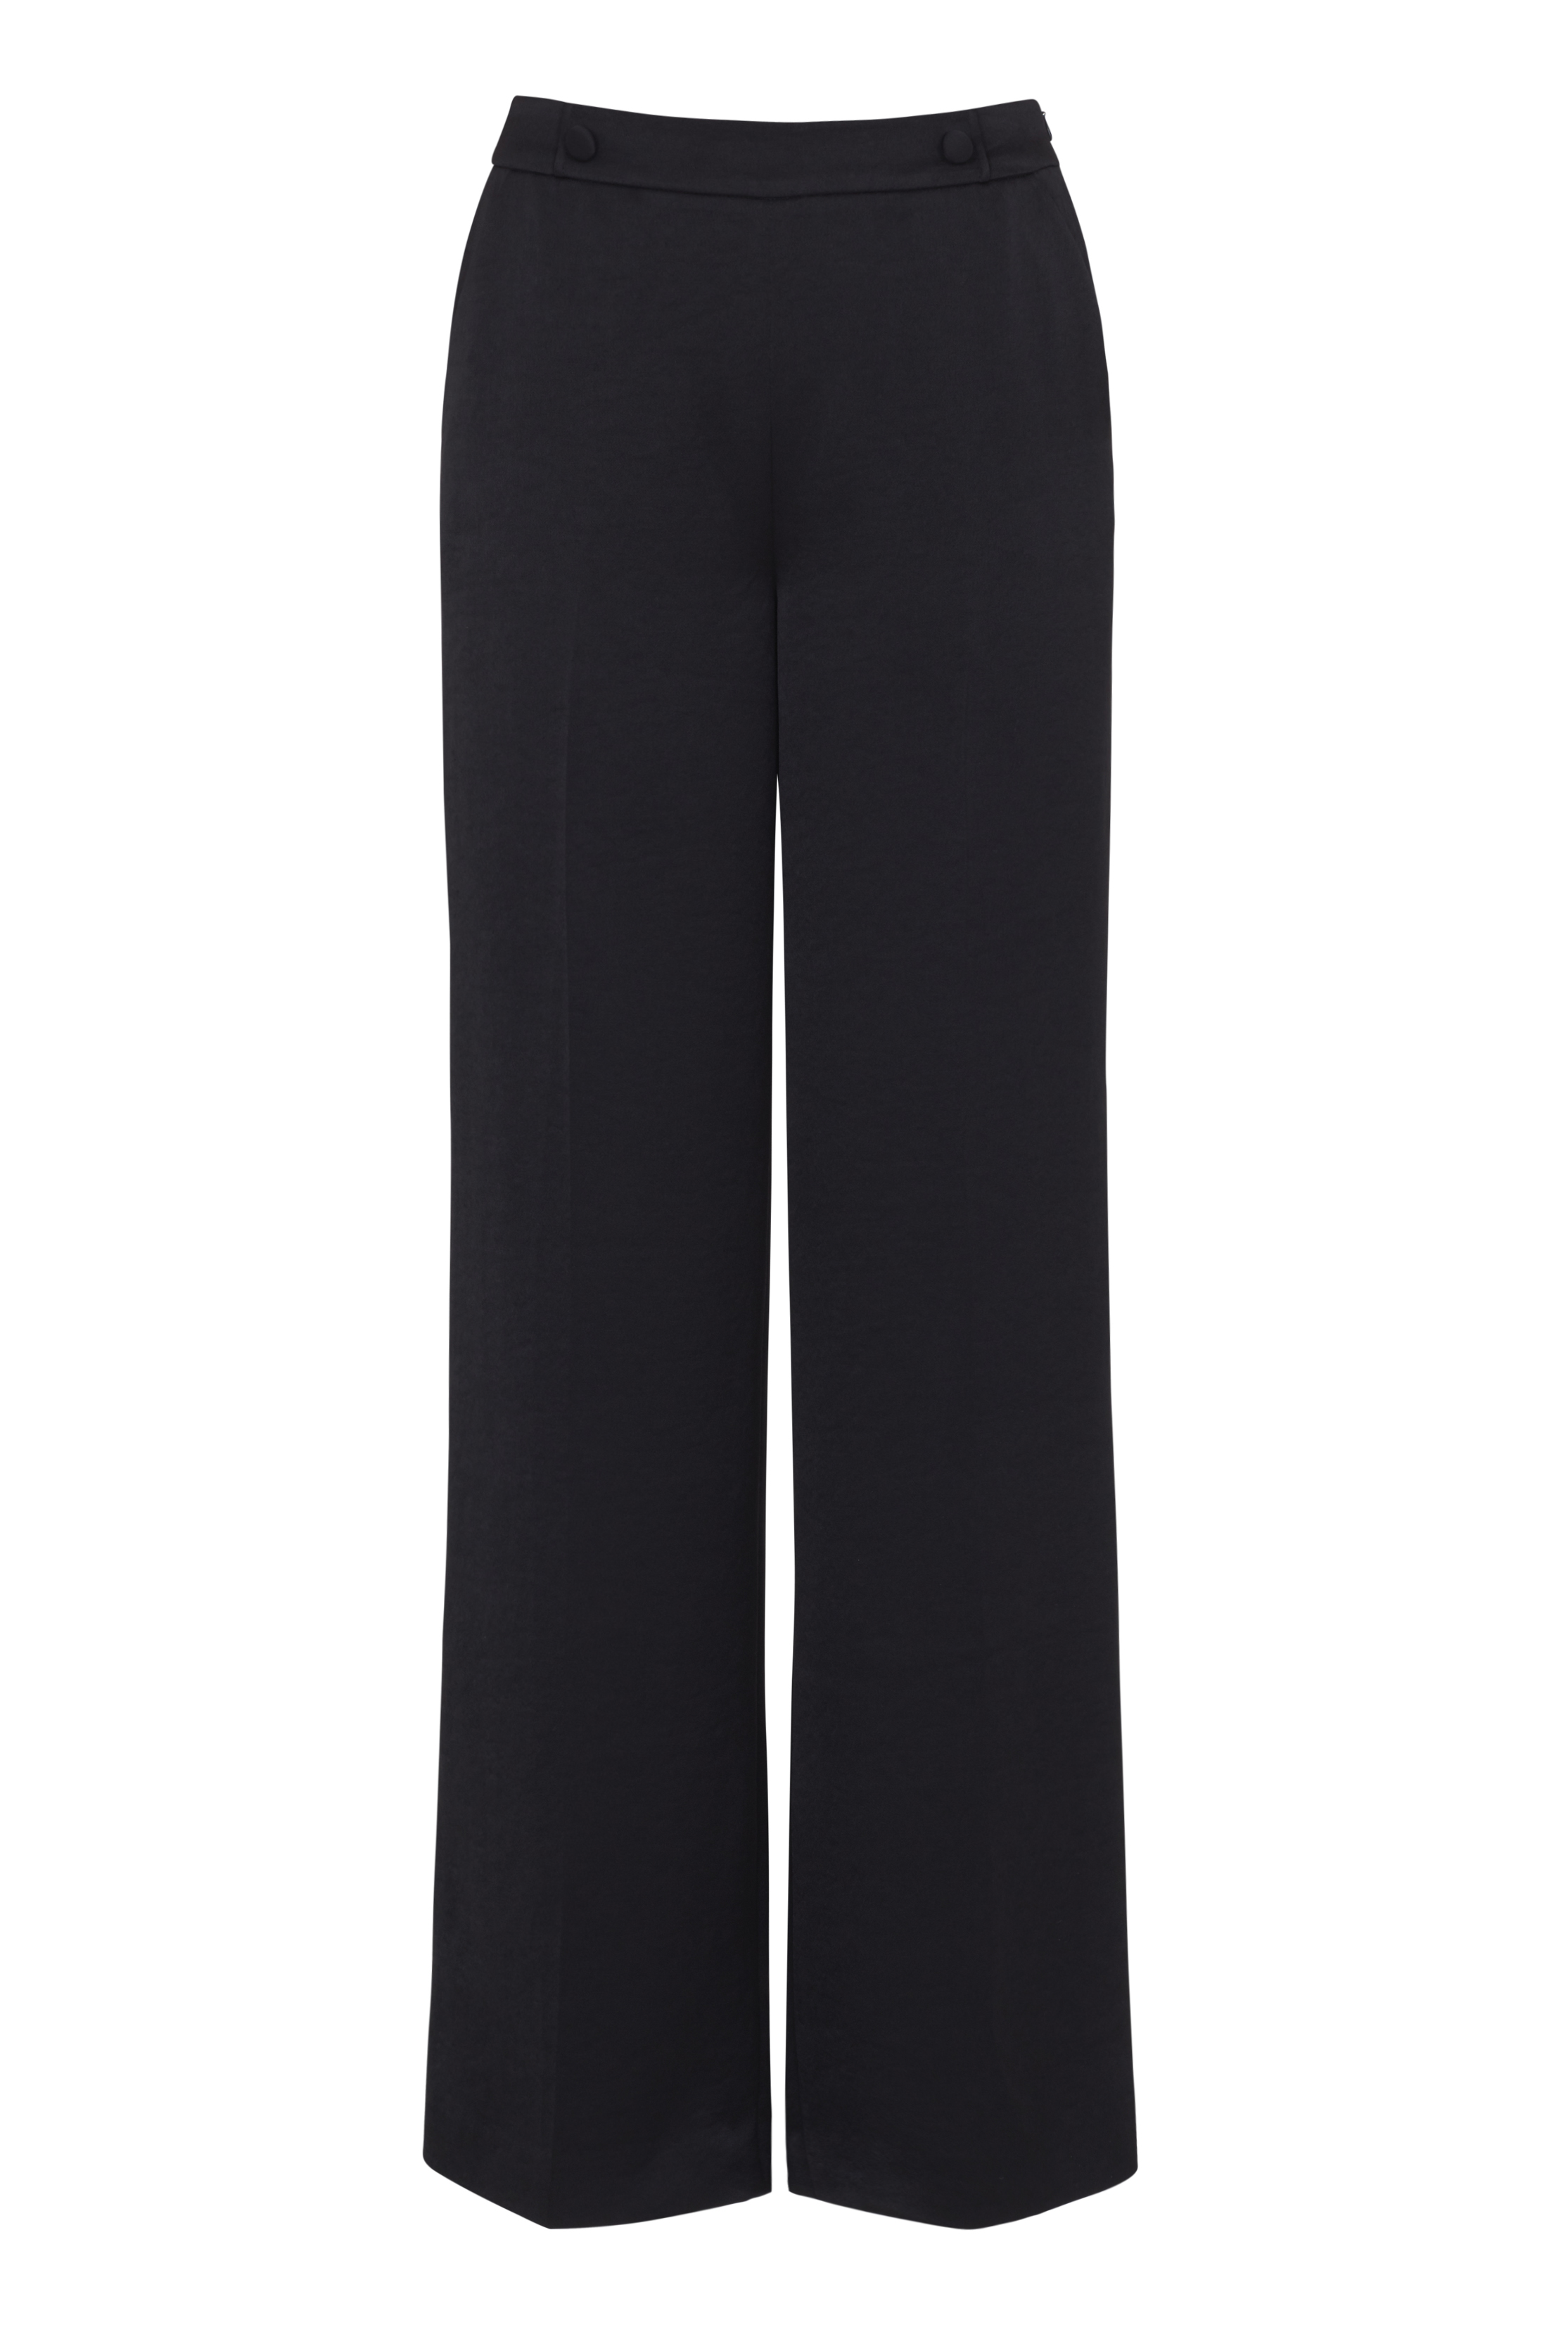 Black Satin Suit Wide Leg Trousers | Long Tall Sally